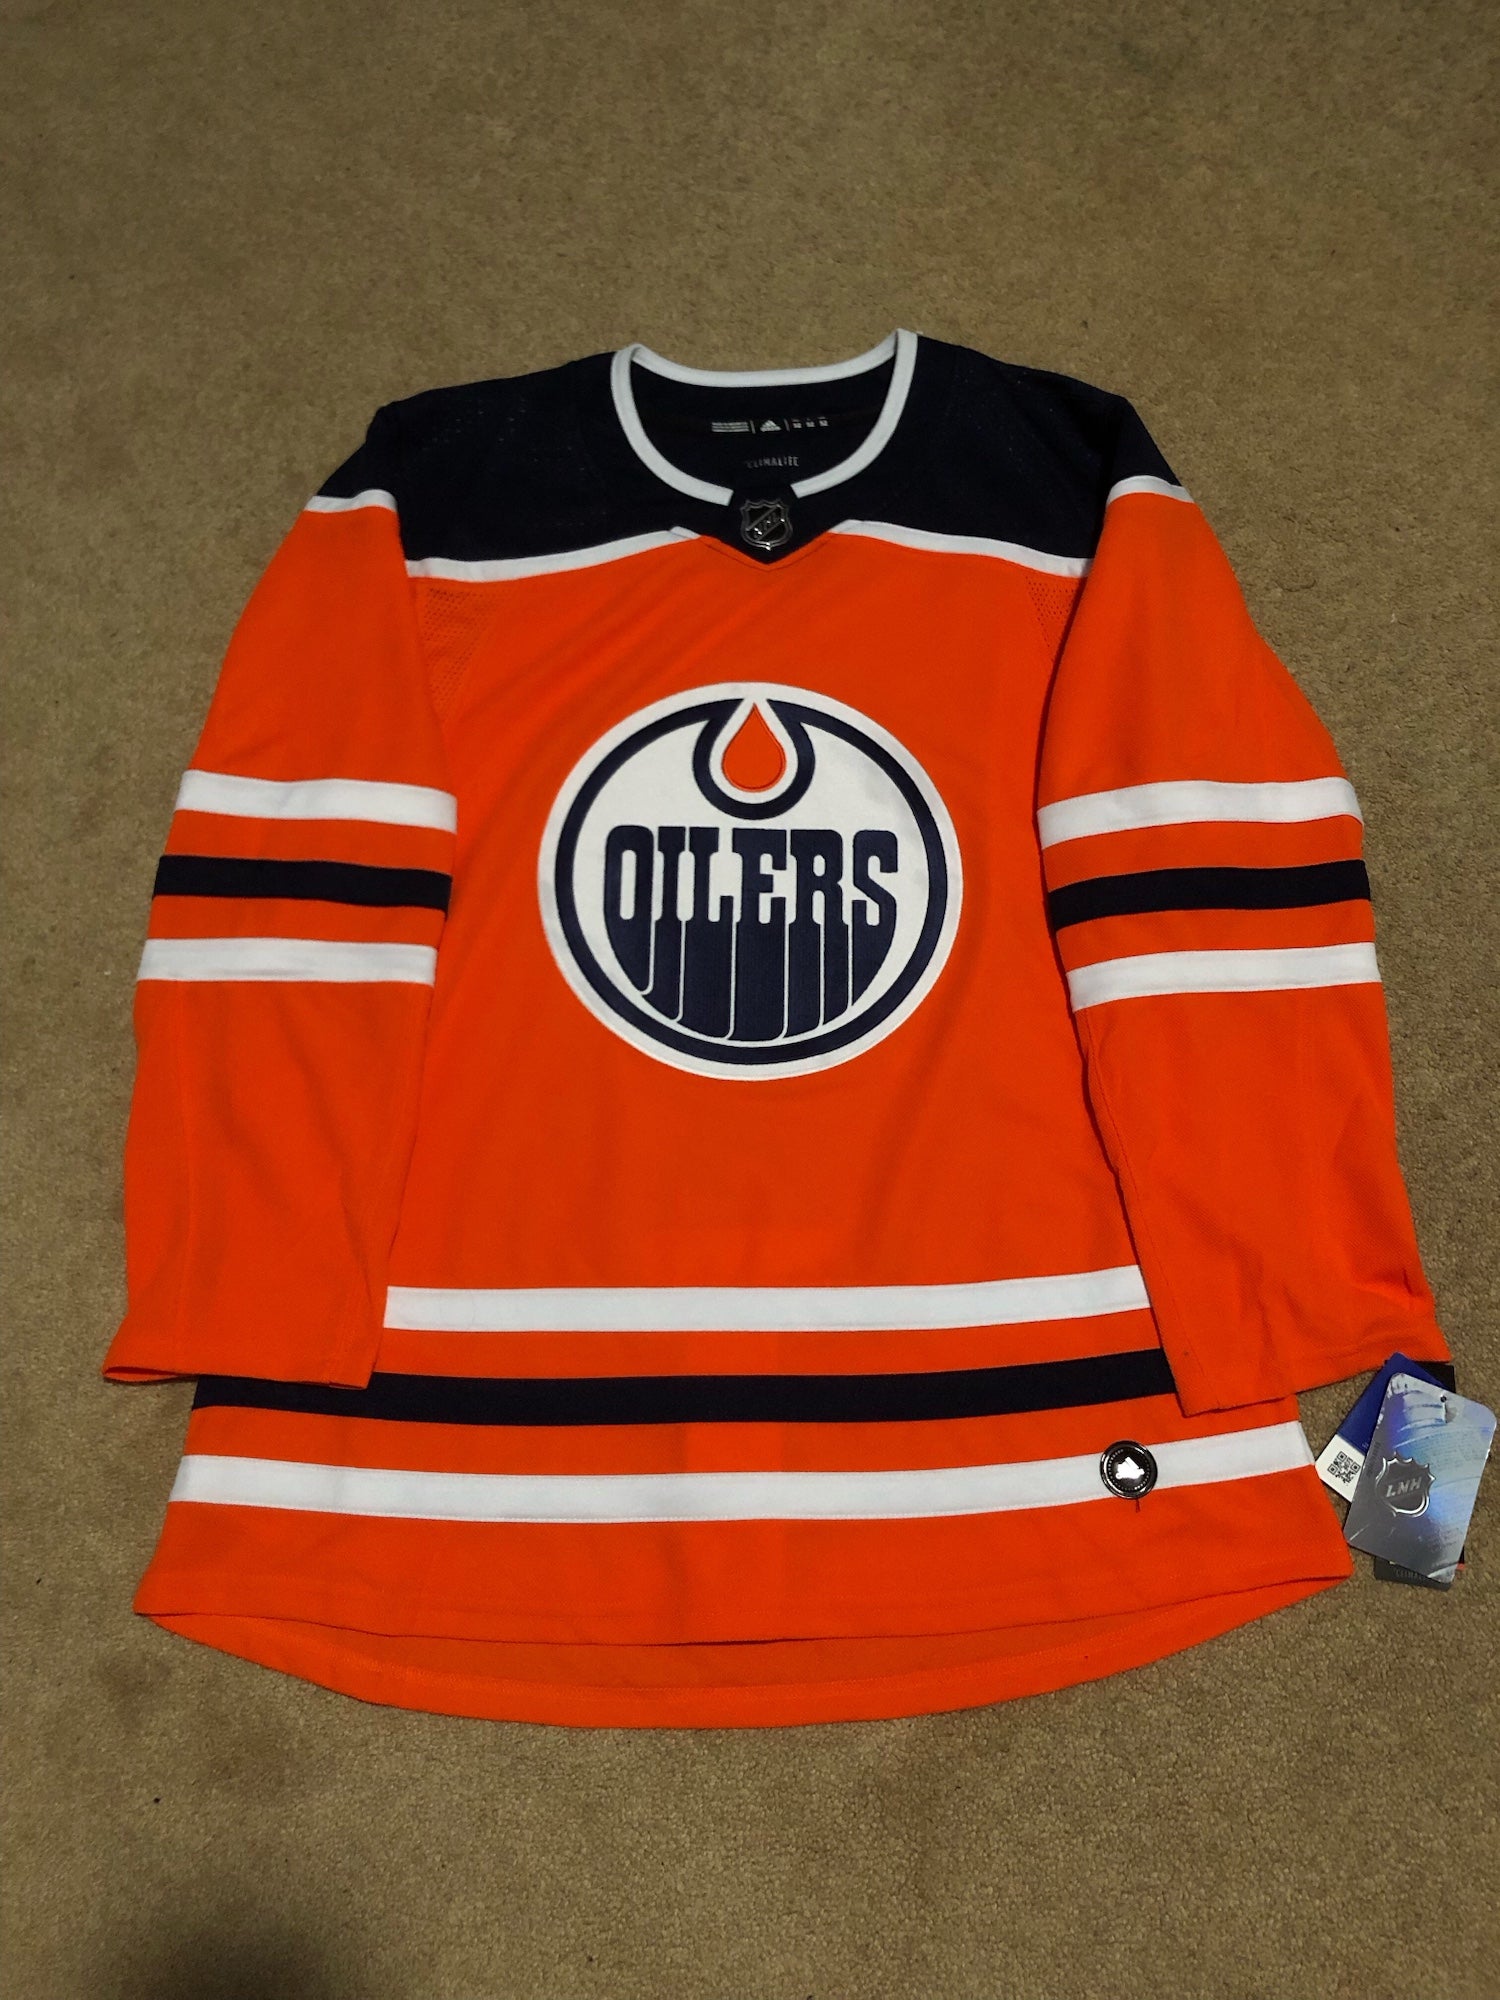 ANY NAME AND NUMBER EDMONTON OILERS HOME OR AWAY AUTHENTIC ADIDAS NHL –  Hockey Authentic